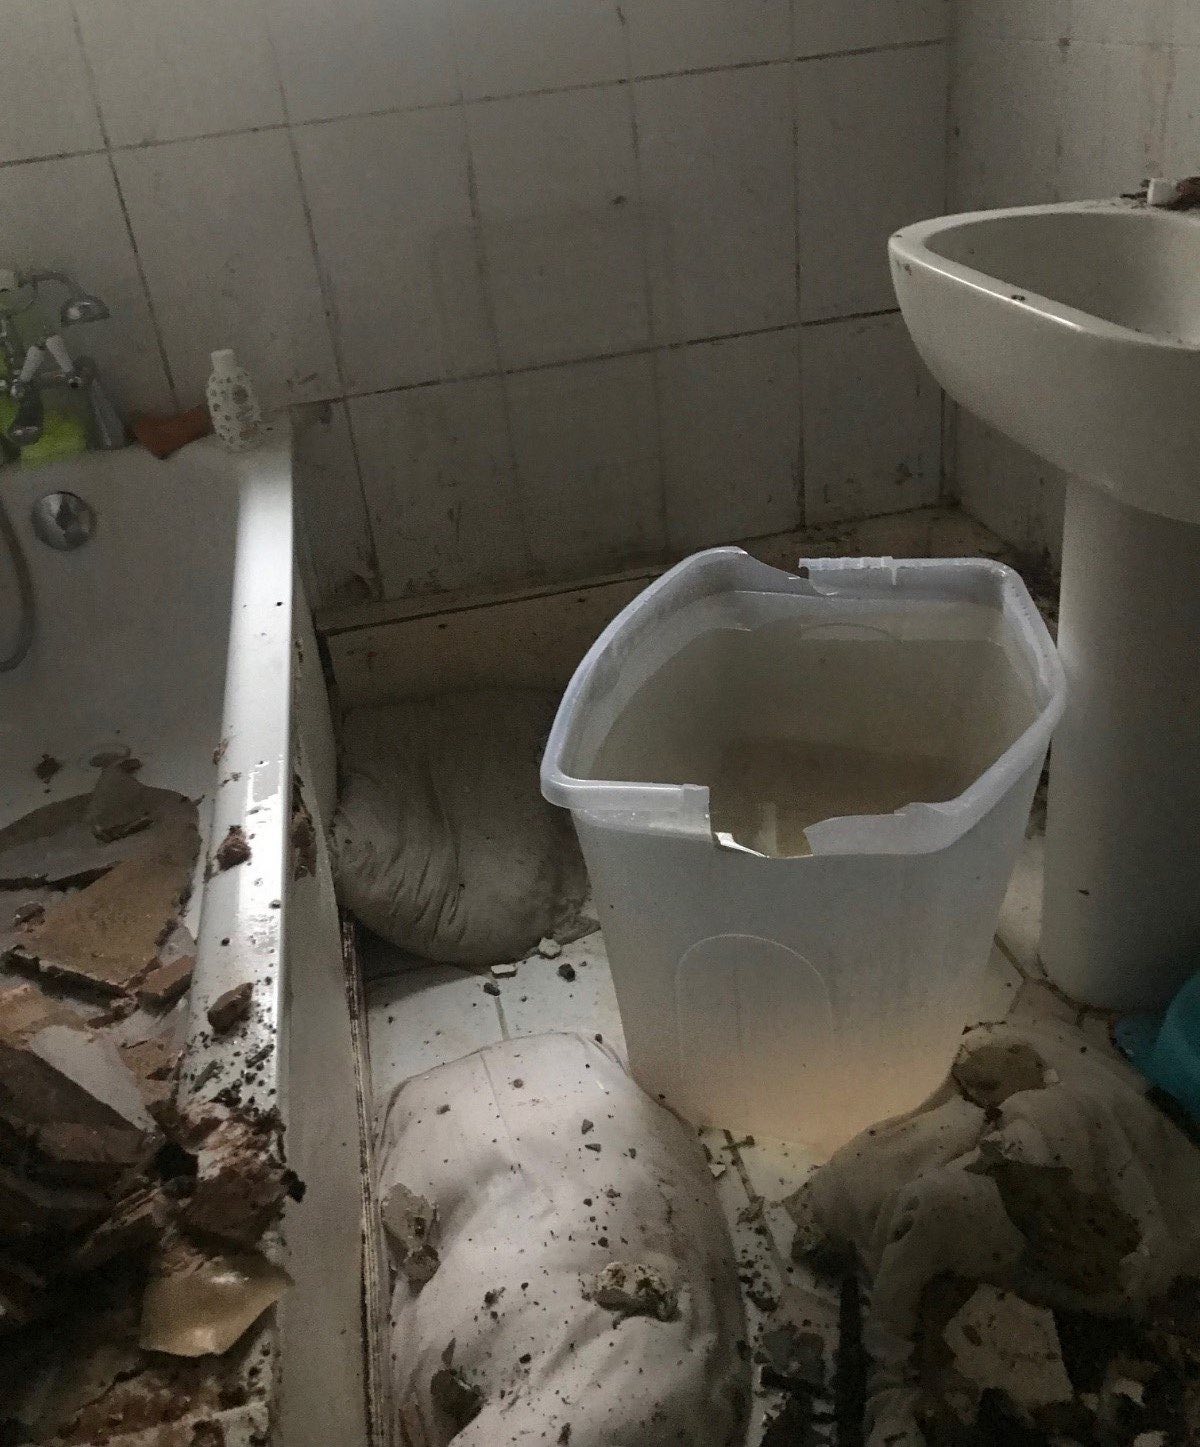 Collapsed bathroom ceiling in Lewisham private rented property